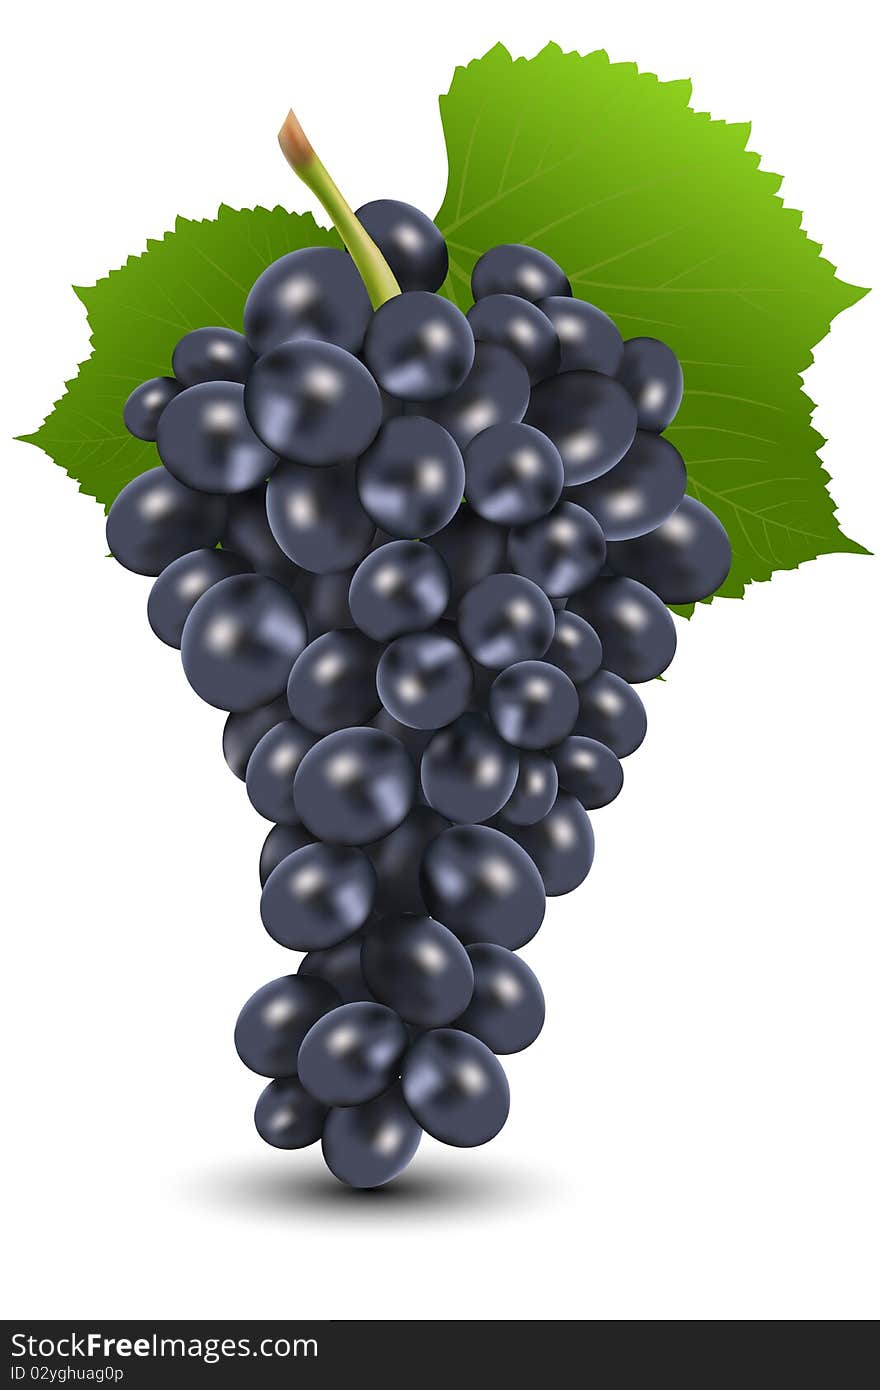 Illustration of bunch of black grapes on isolated background